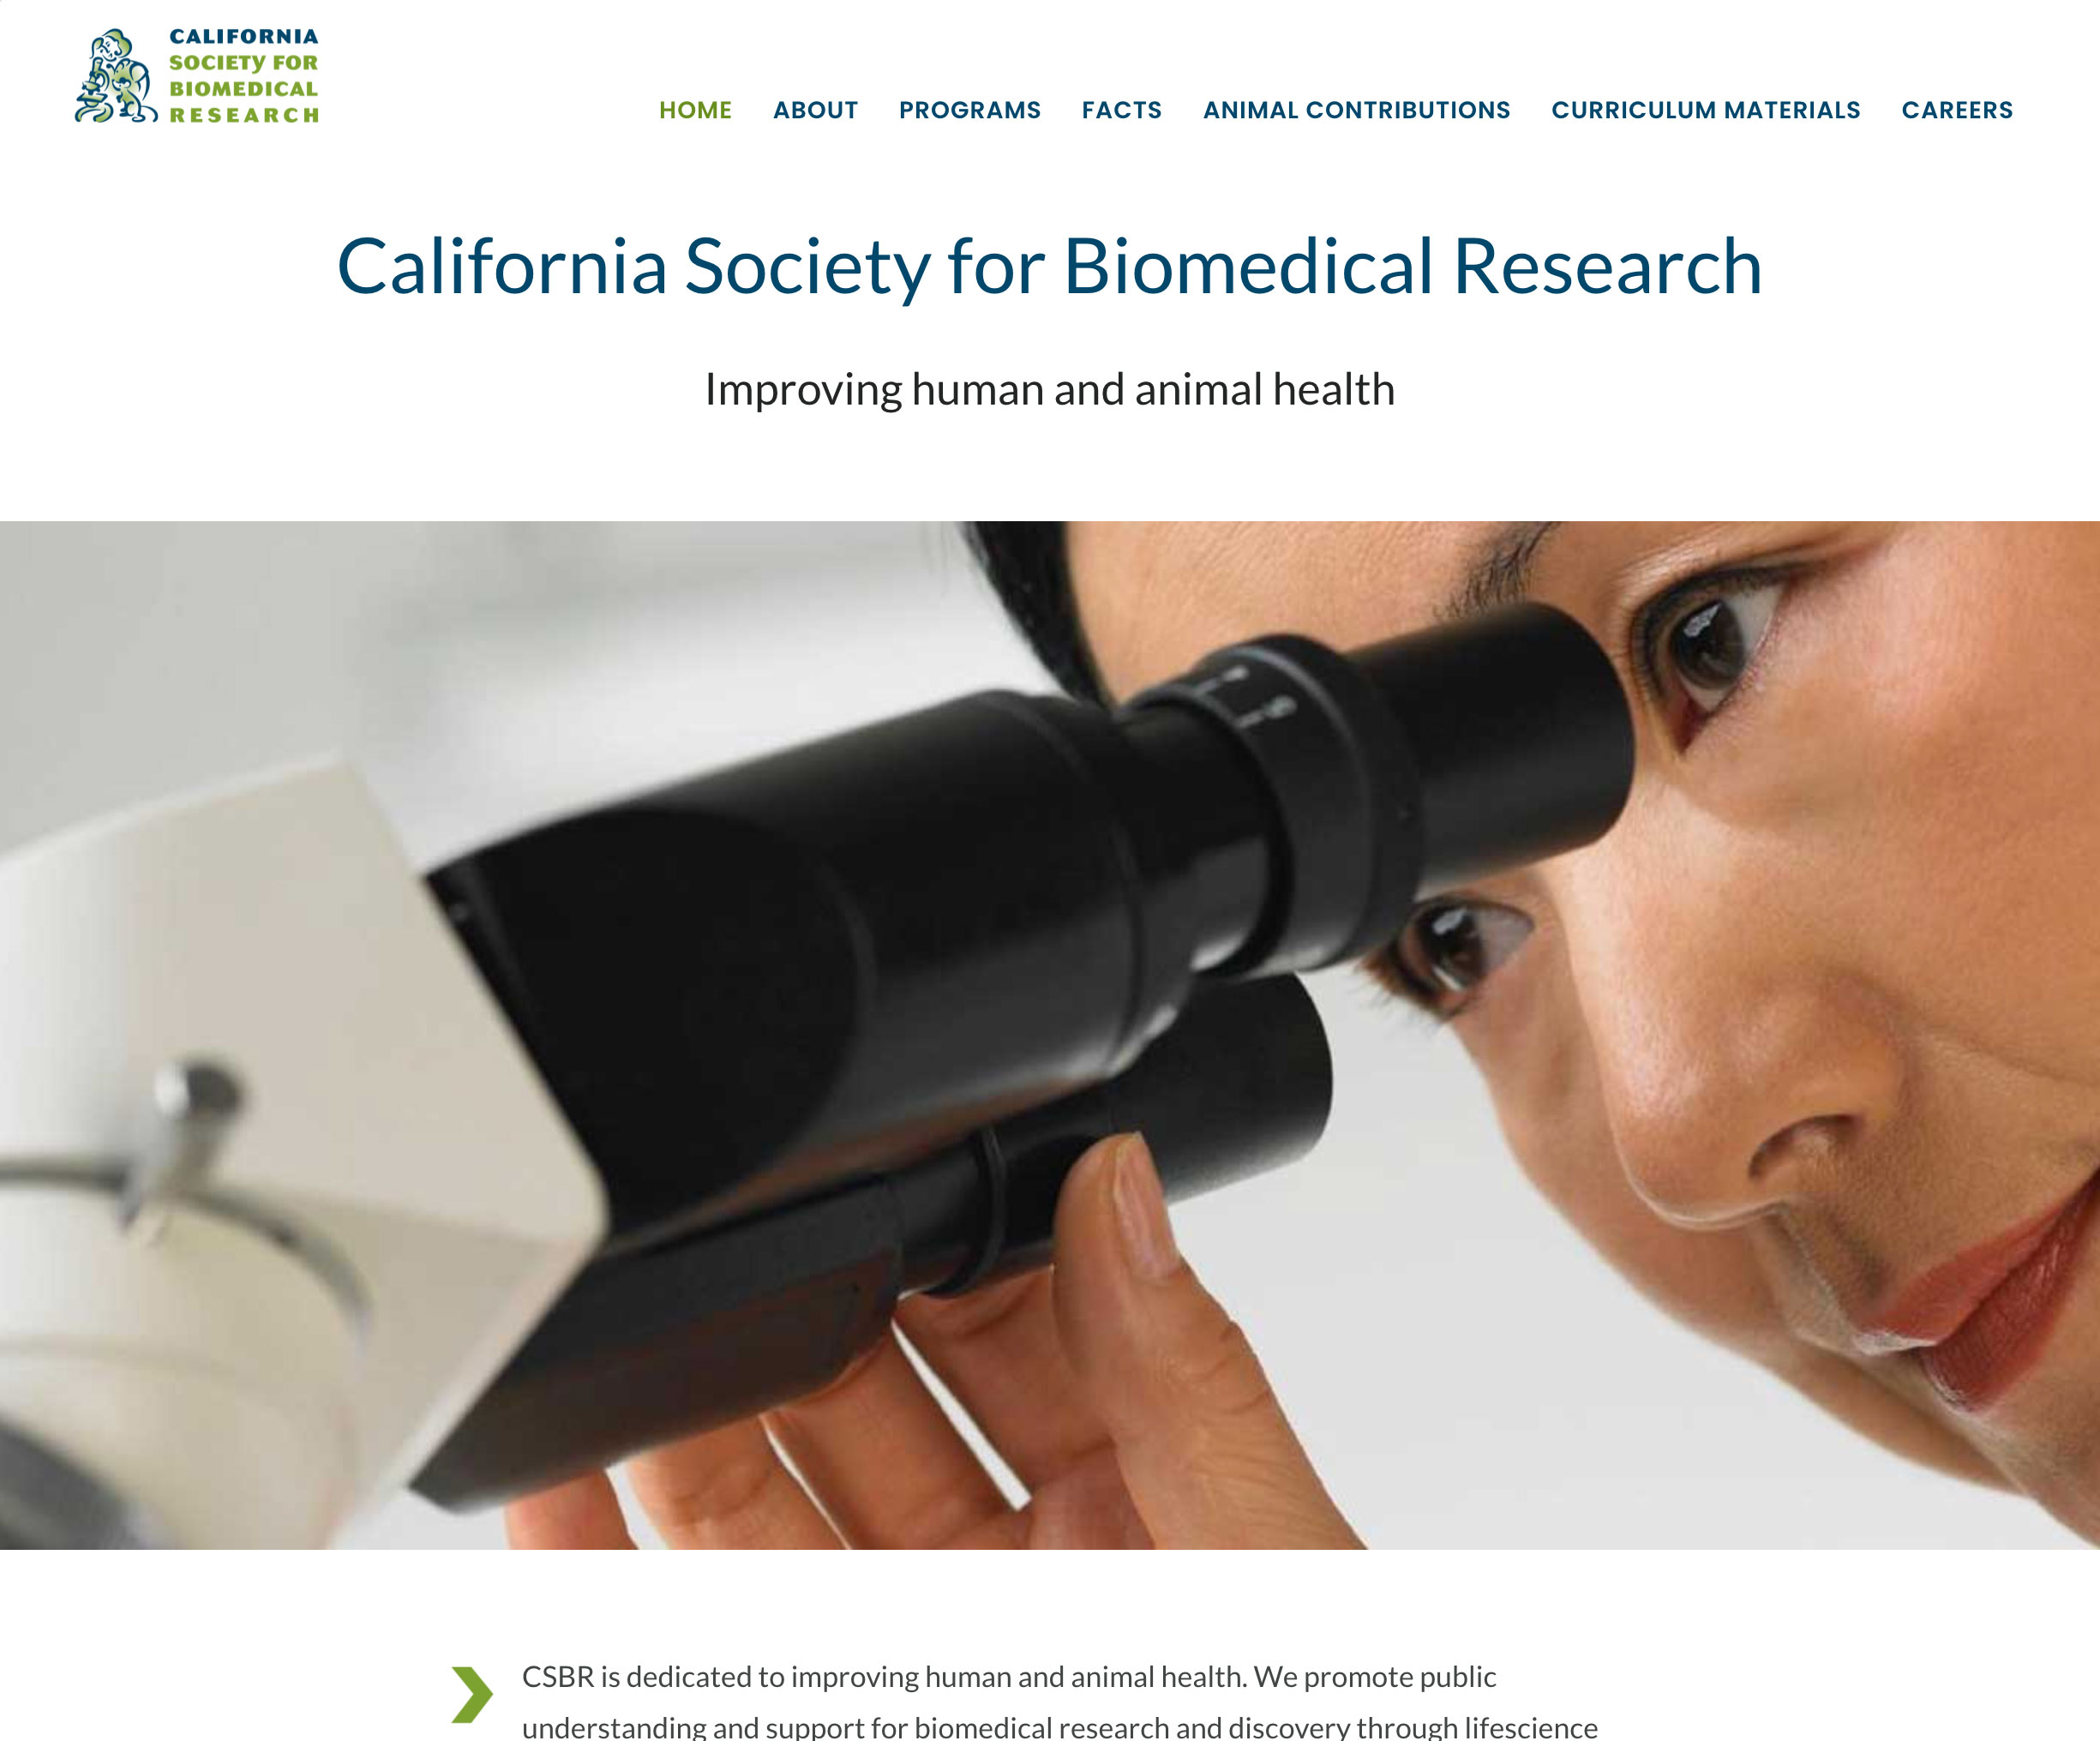 California Society for Biomedical Research